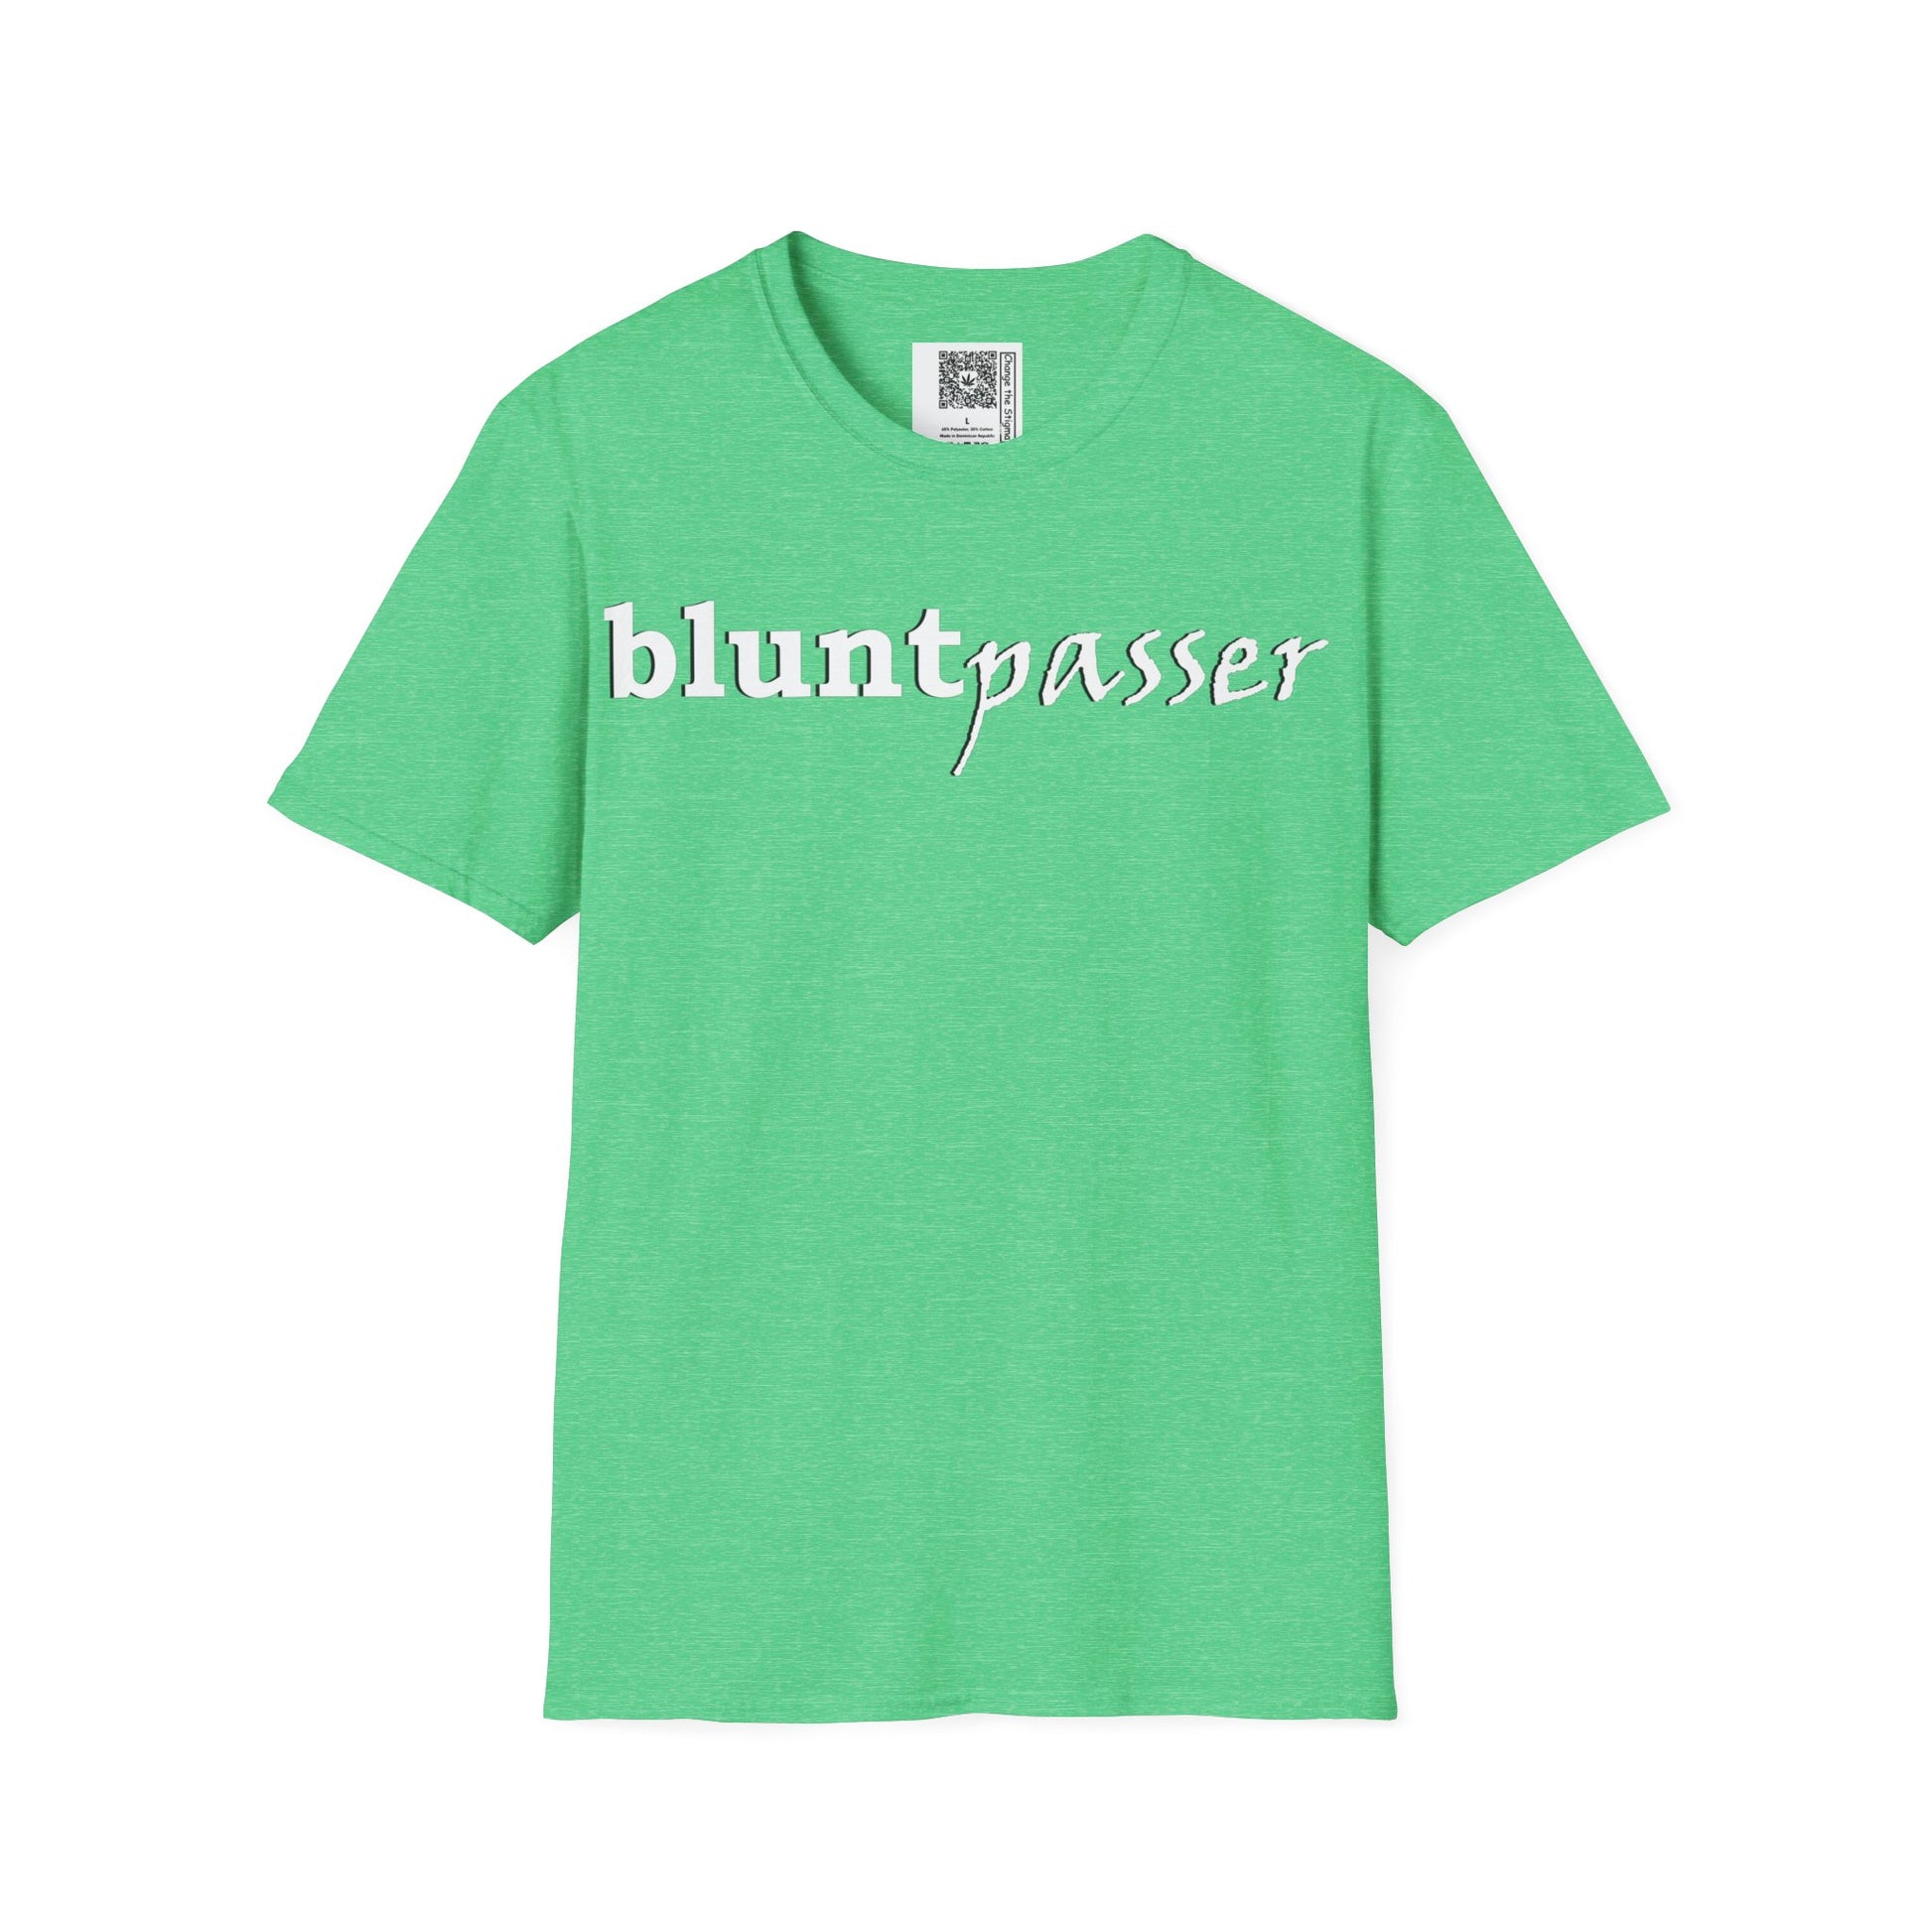 Change the Stigma, Heather Irish Green color, shirt saying "blunt passer", Shirt is open displayed, Qr code is shown neck tag